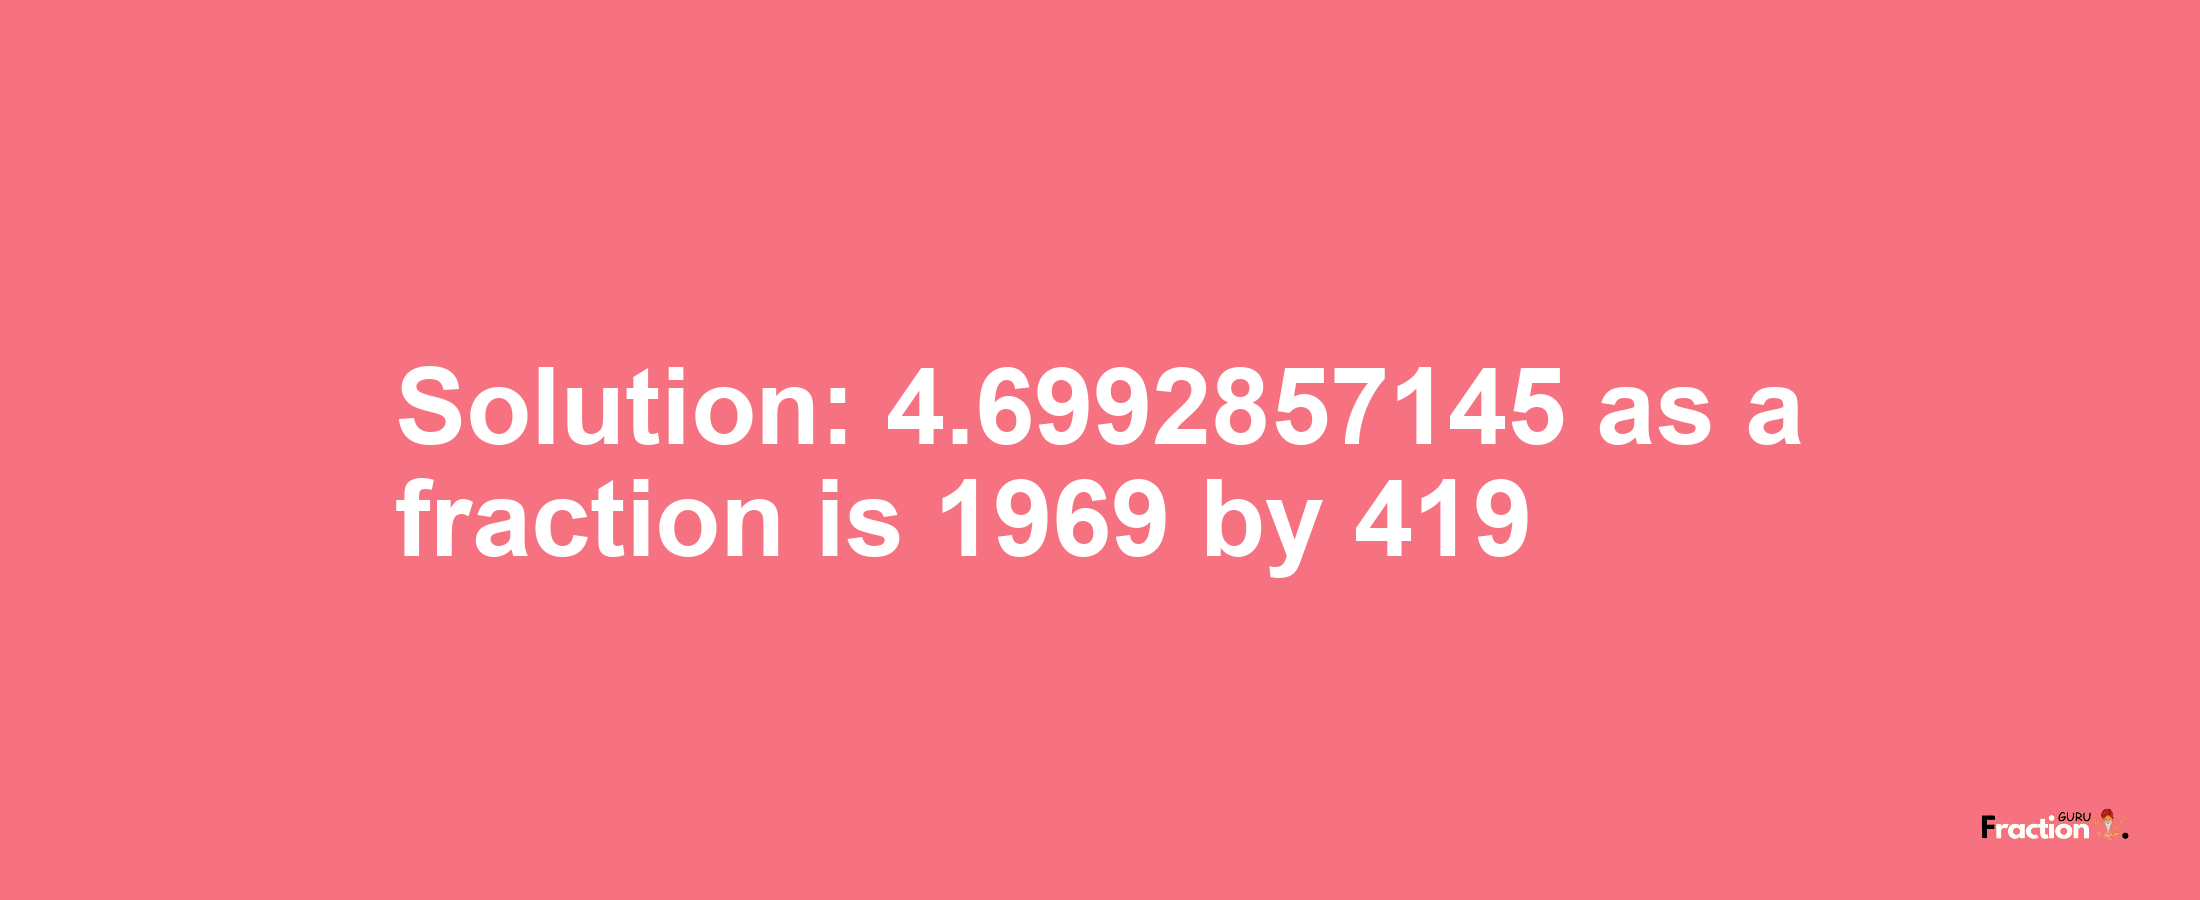 Solution:4.6992857145 as a fraction is 1969/419